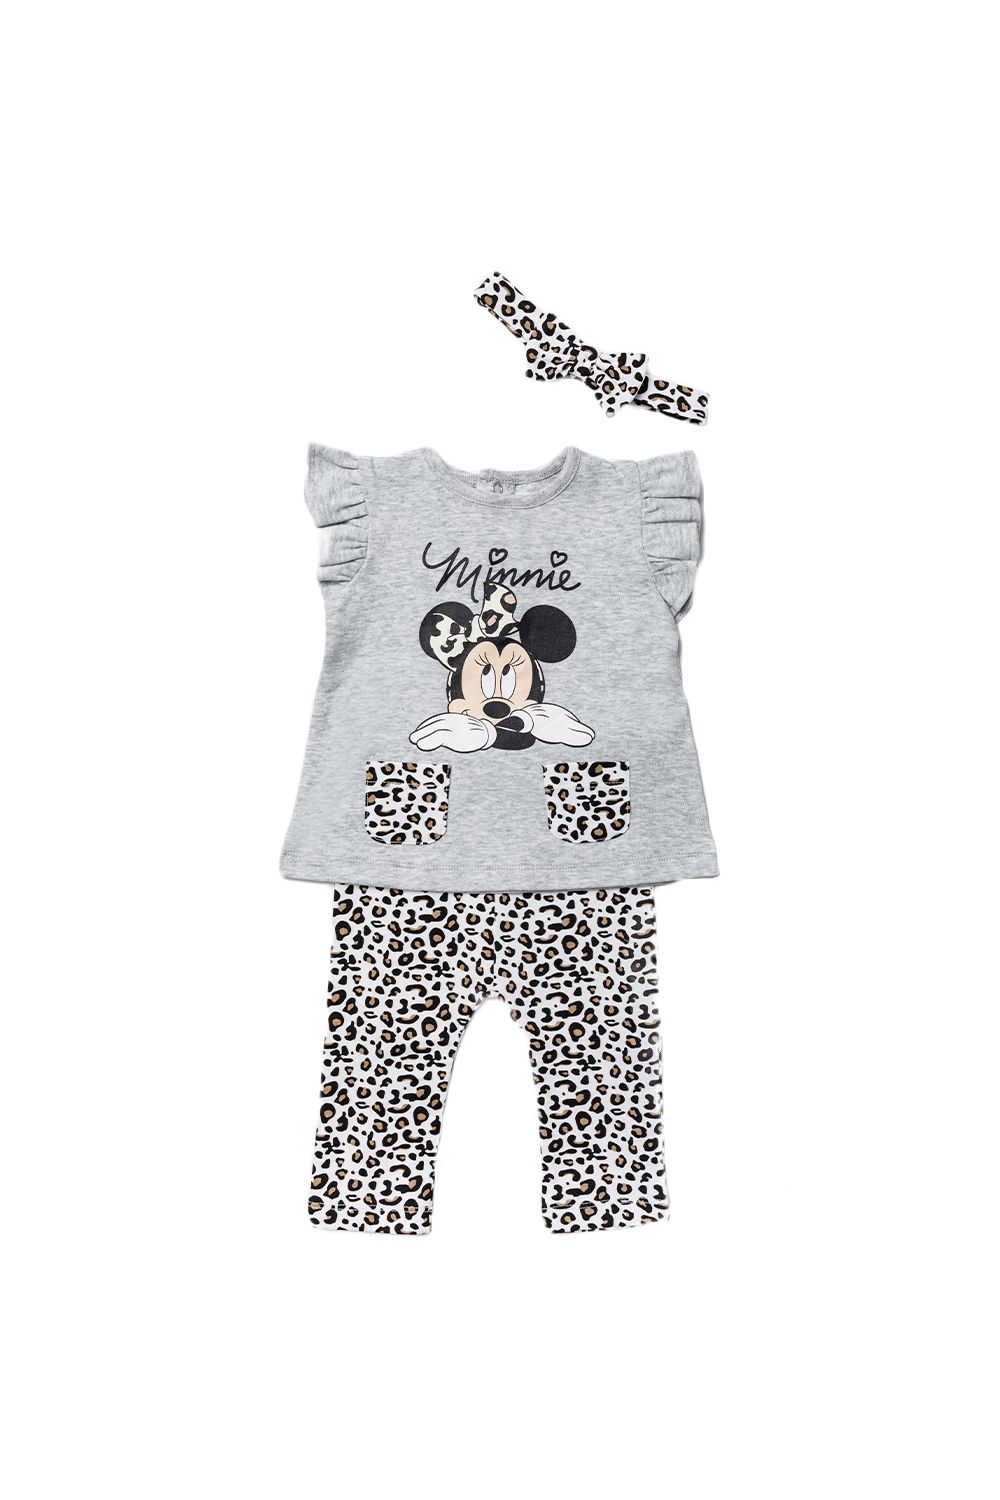 This adorable Disney Baby three-piece set features Minnie Mouse print with leopard print details. The set includes a t-shirt with frilled sleeves & pockets, printed leggings, and a matching headband! Each item in the set is cotton and the top has popper fastenings, keeping your little one comfortable. This set would make a lovely gift, or a new addition to your little ones wardrobe!